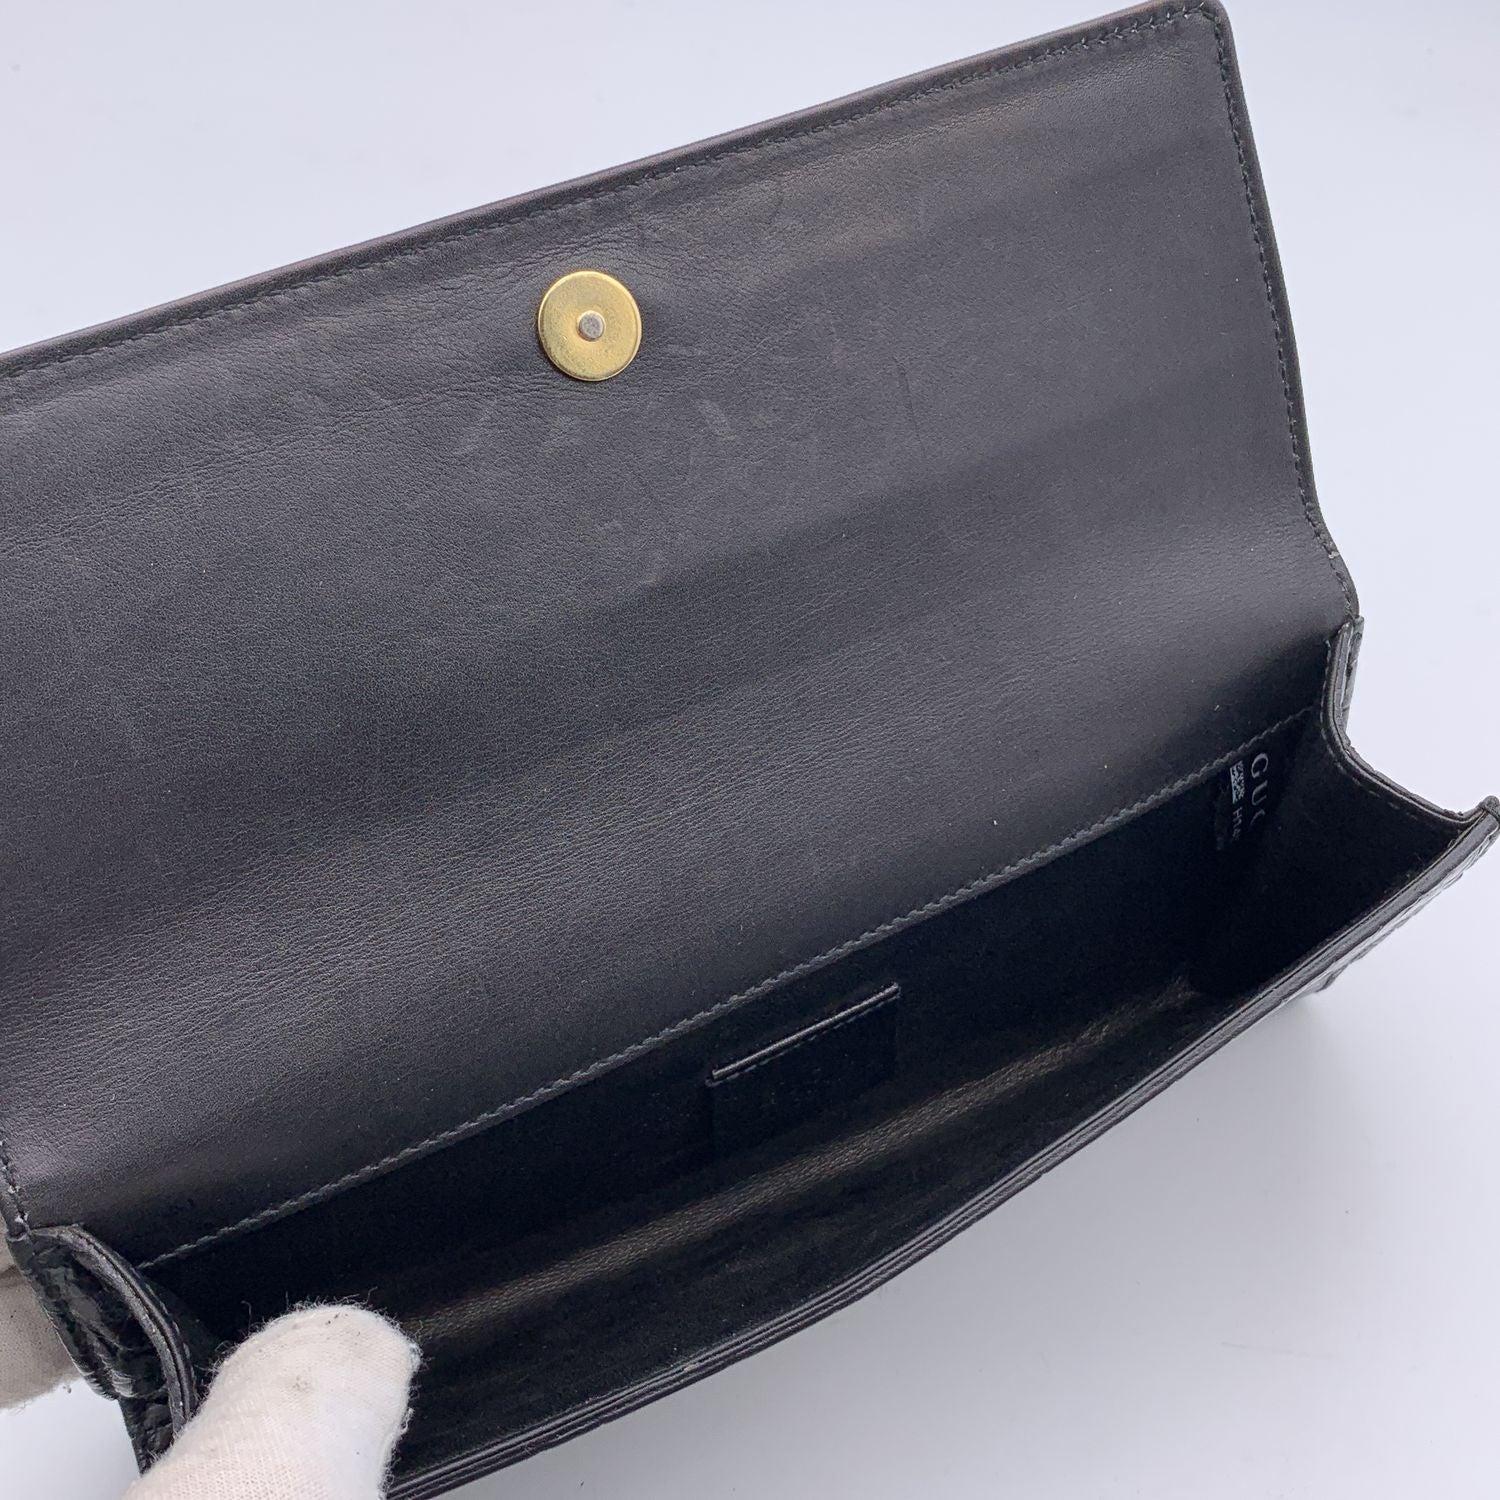 Gucci Black Embossed Leather Romy Clutch Bag Wallet 2